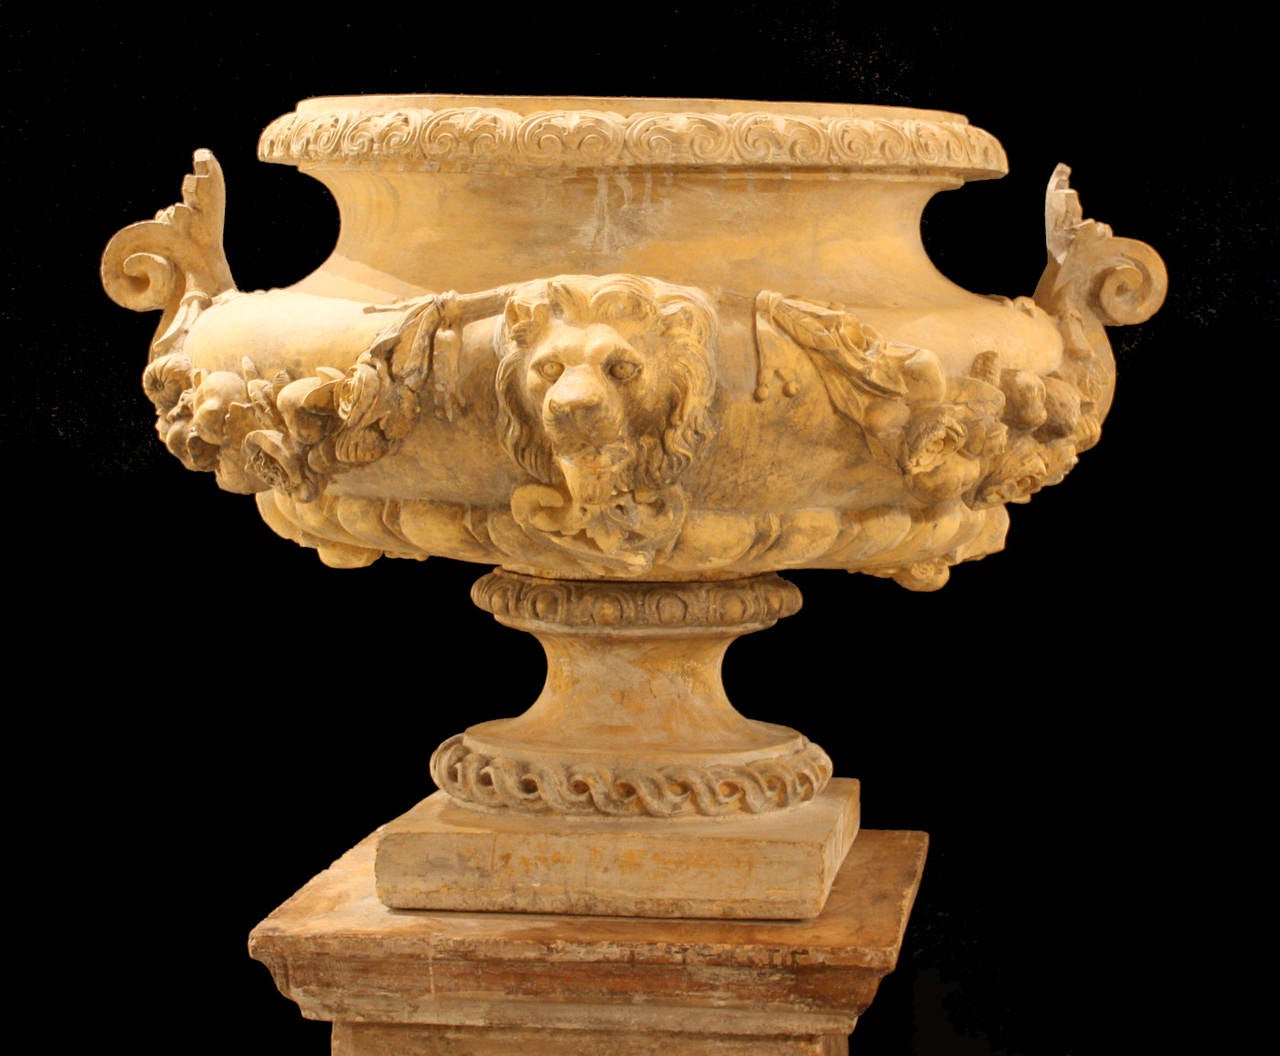 Monumental 19th century Swedish neoclassical styled coade stone urn resting on companion coade stone plinth. Sharp sculptural detailing.  Suitable for indoor or outdoor use.